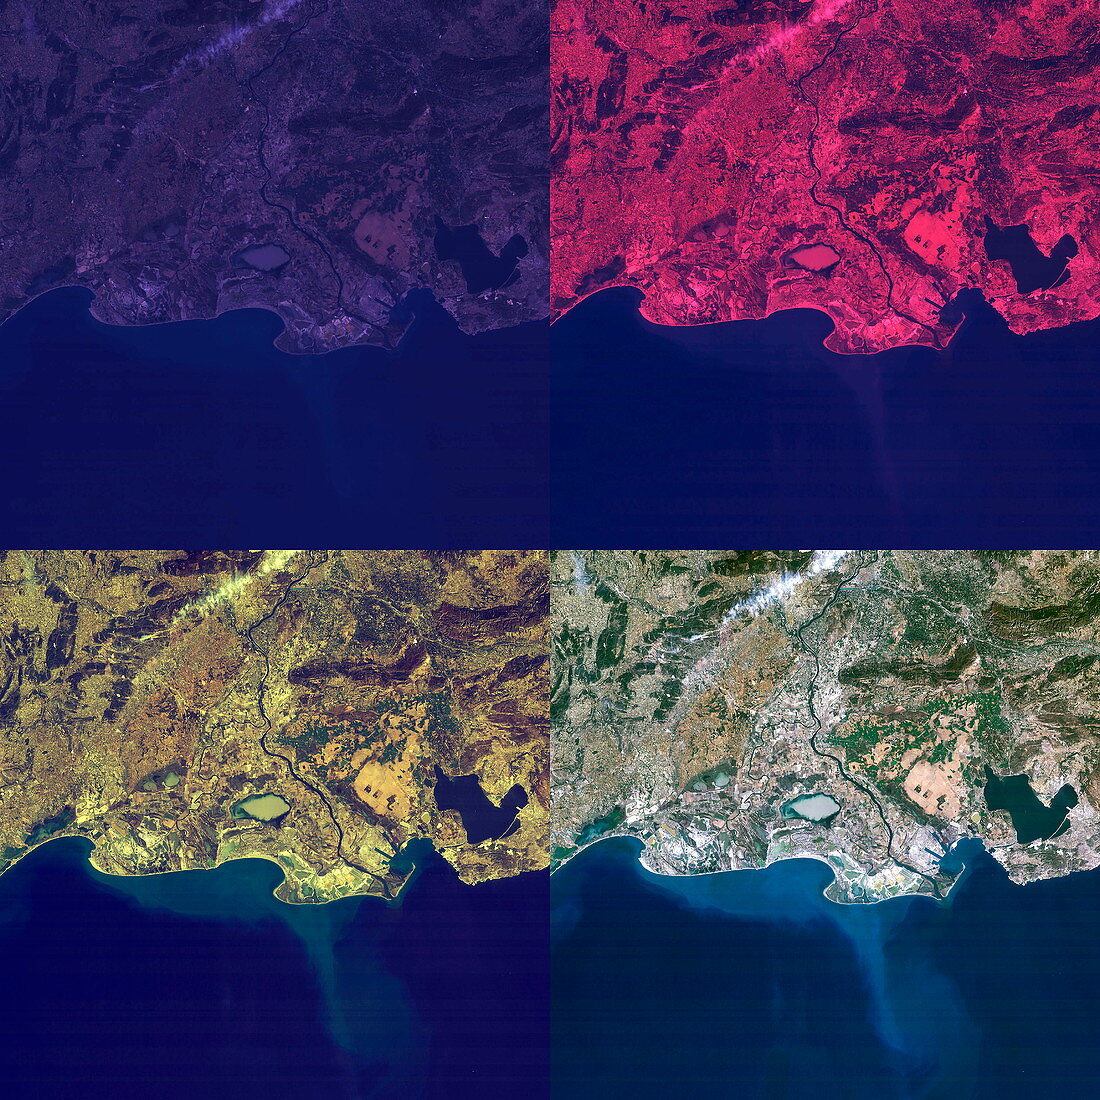 Production of a satellite image